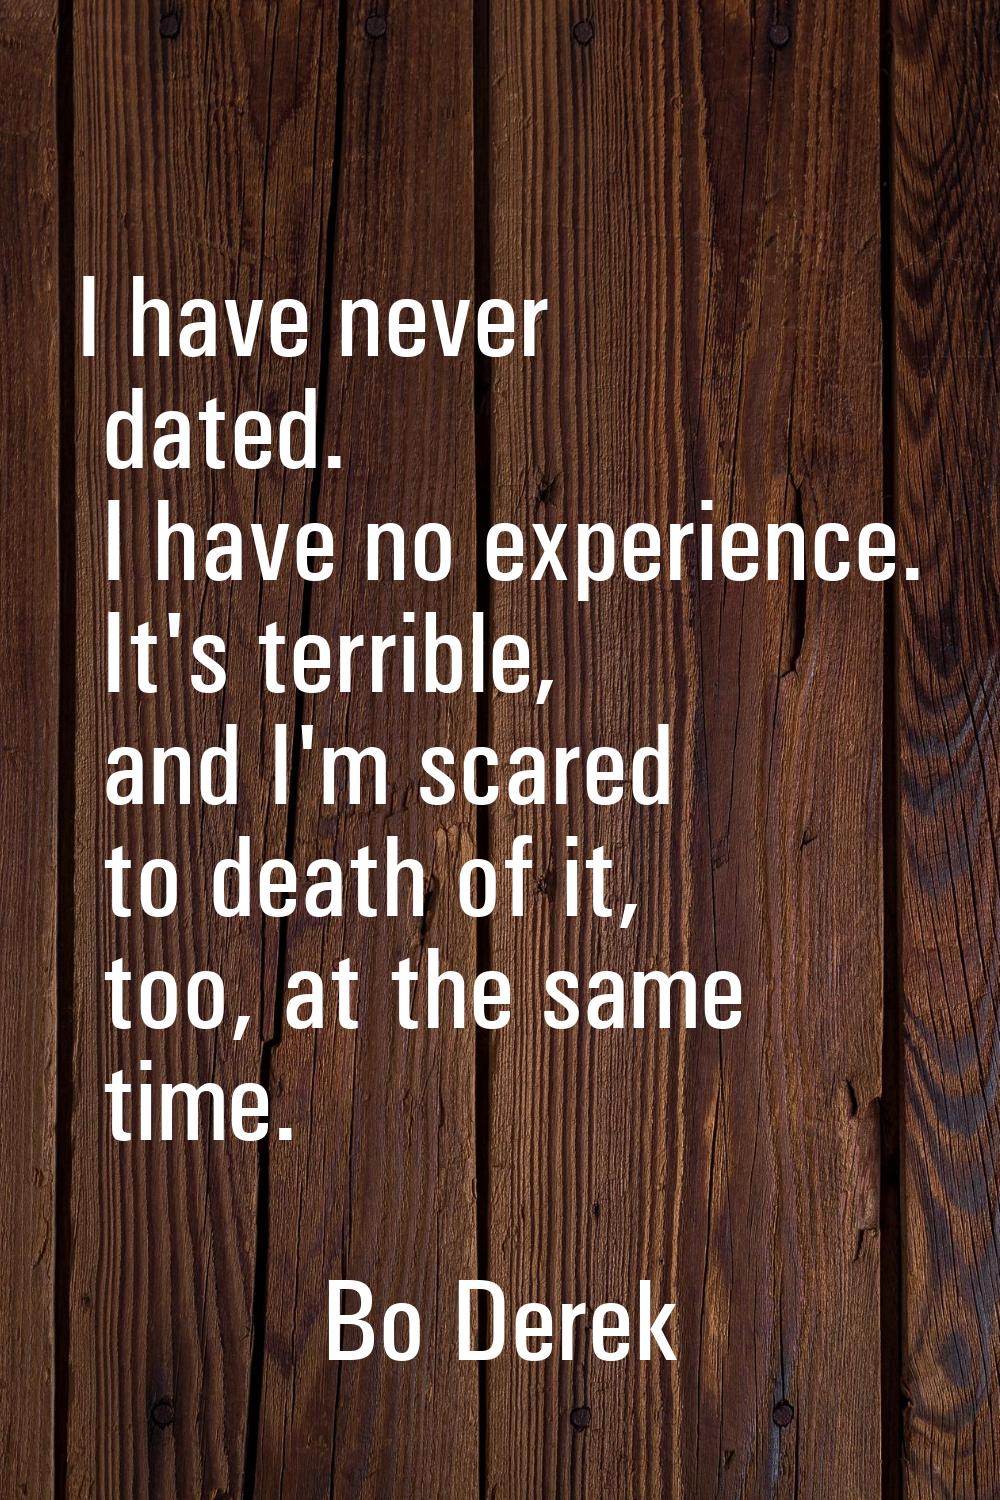 I have never dated. I have no experience. It's terrible, and I'm scared to death of it, too, at the